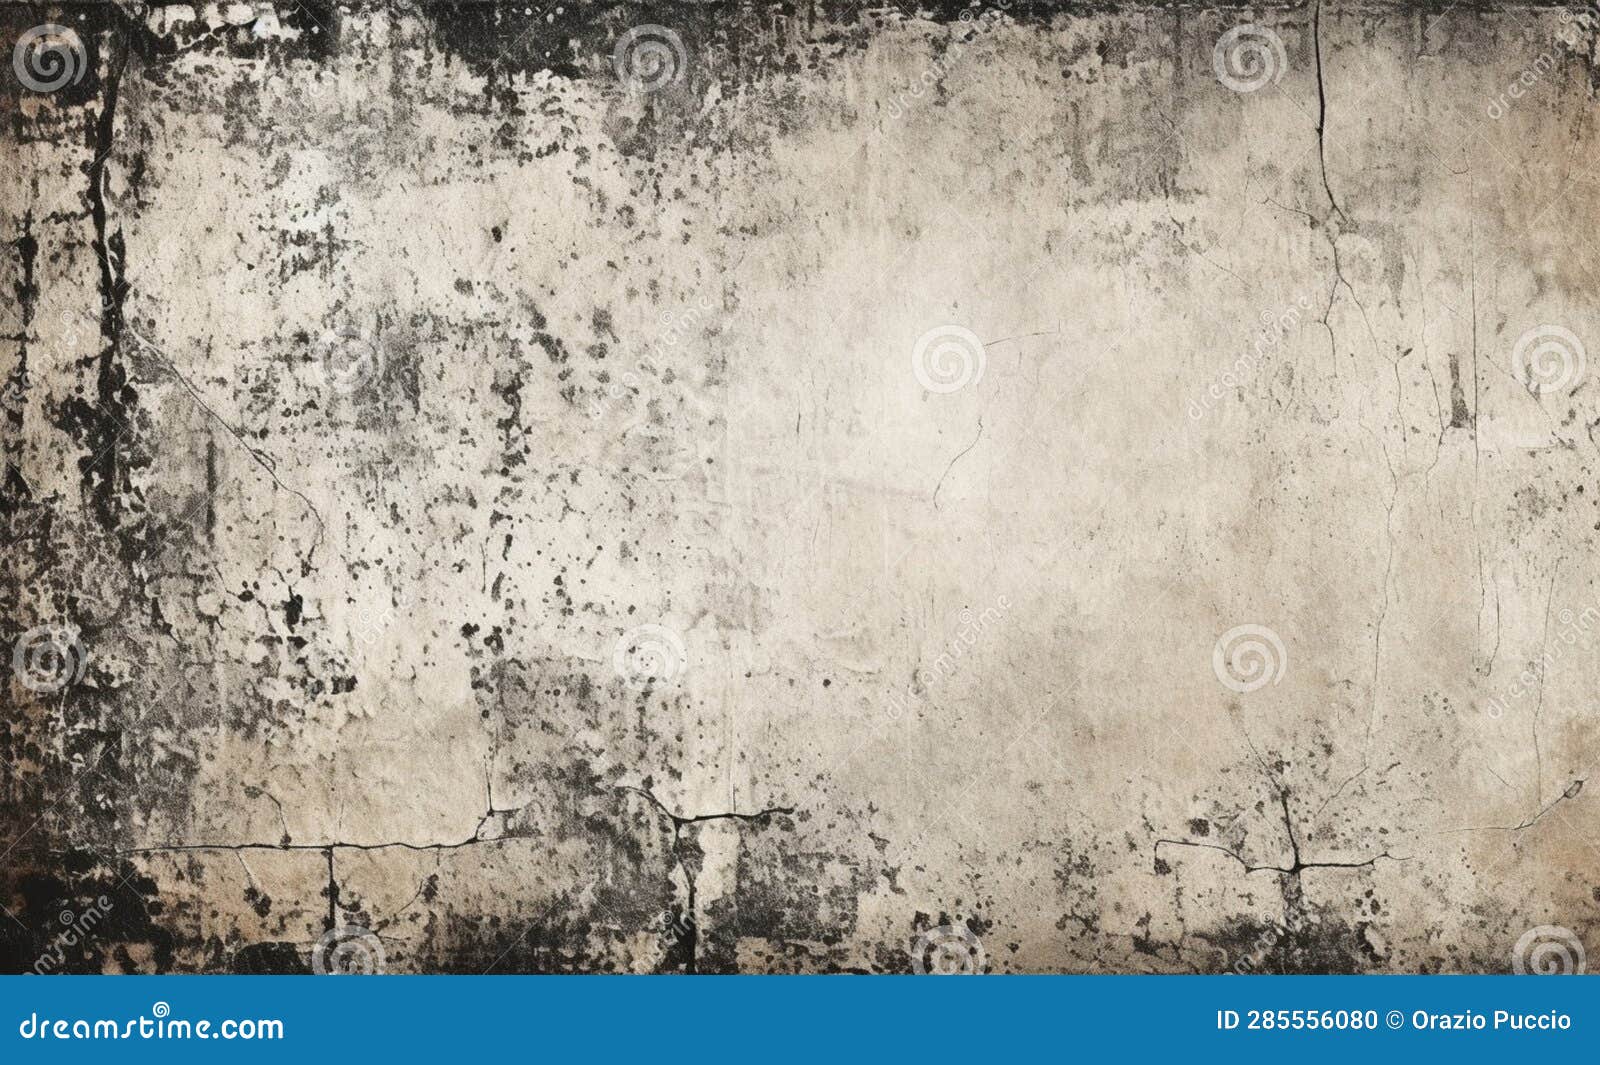 urban grunge background - gray wall texture with rough feel and streetwise atmosphere. grunge wall texture background. metropolis